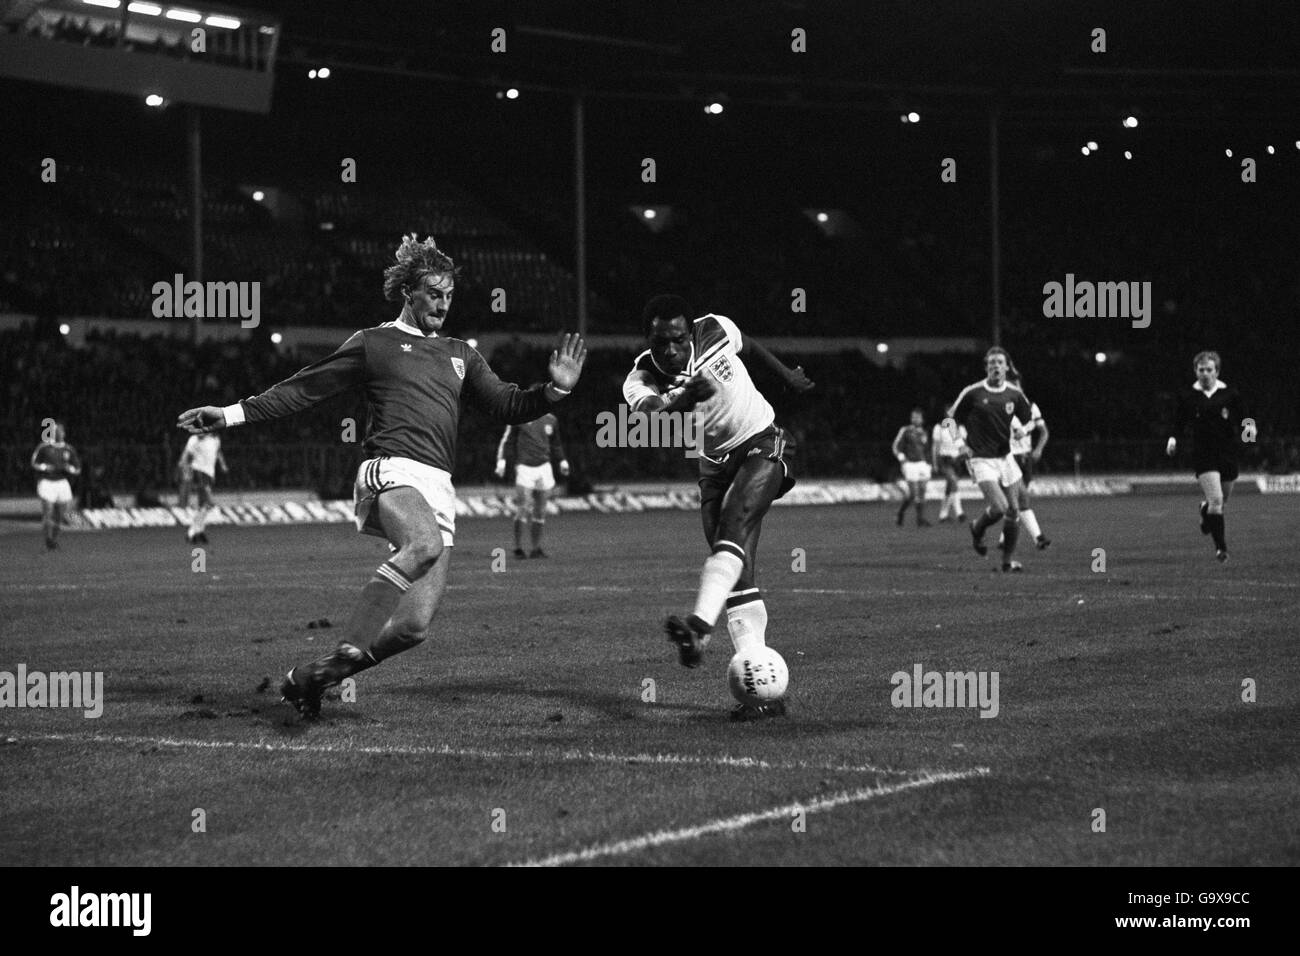 England's Luther Blissett (right) in a busy confrontation for the ball versus a Luxembourg opponent during the European Championship at Wembley Stadium Stock Photo